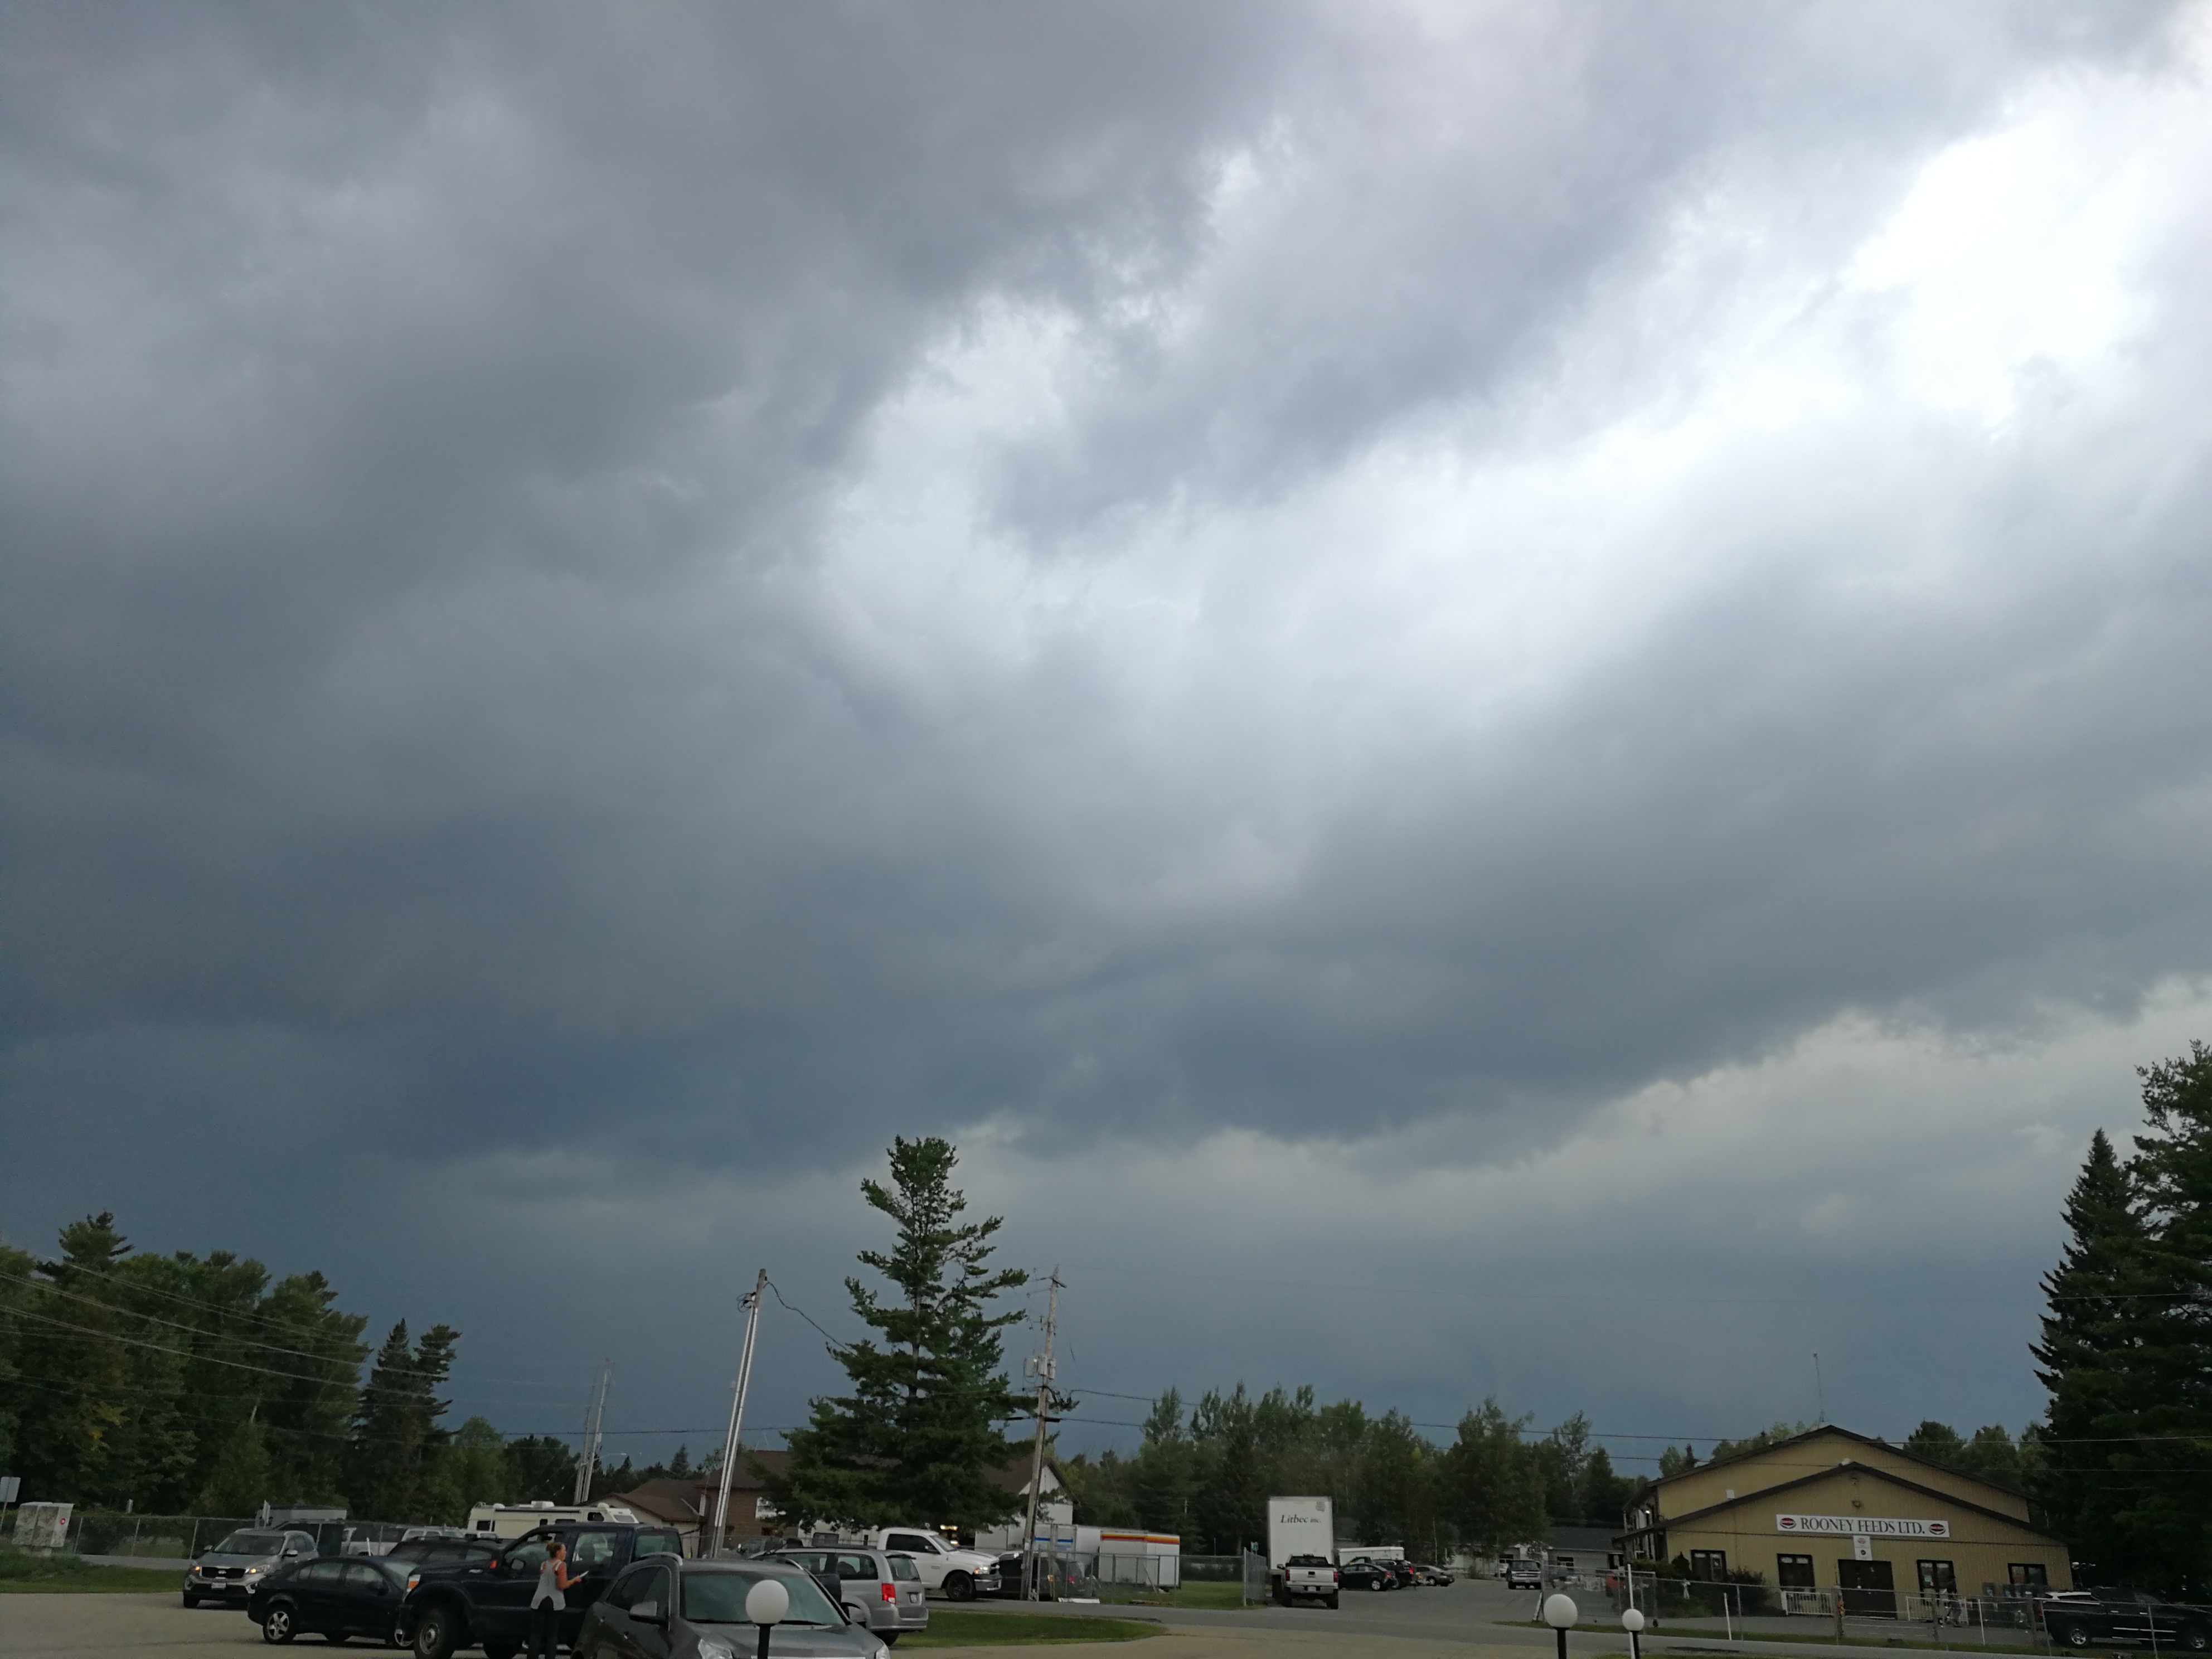 Tornado warning issued for Smiths Falls - My Kemptville Now